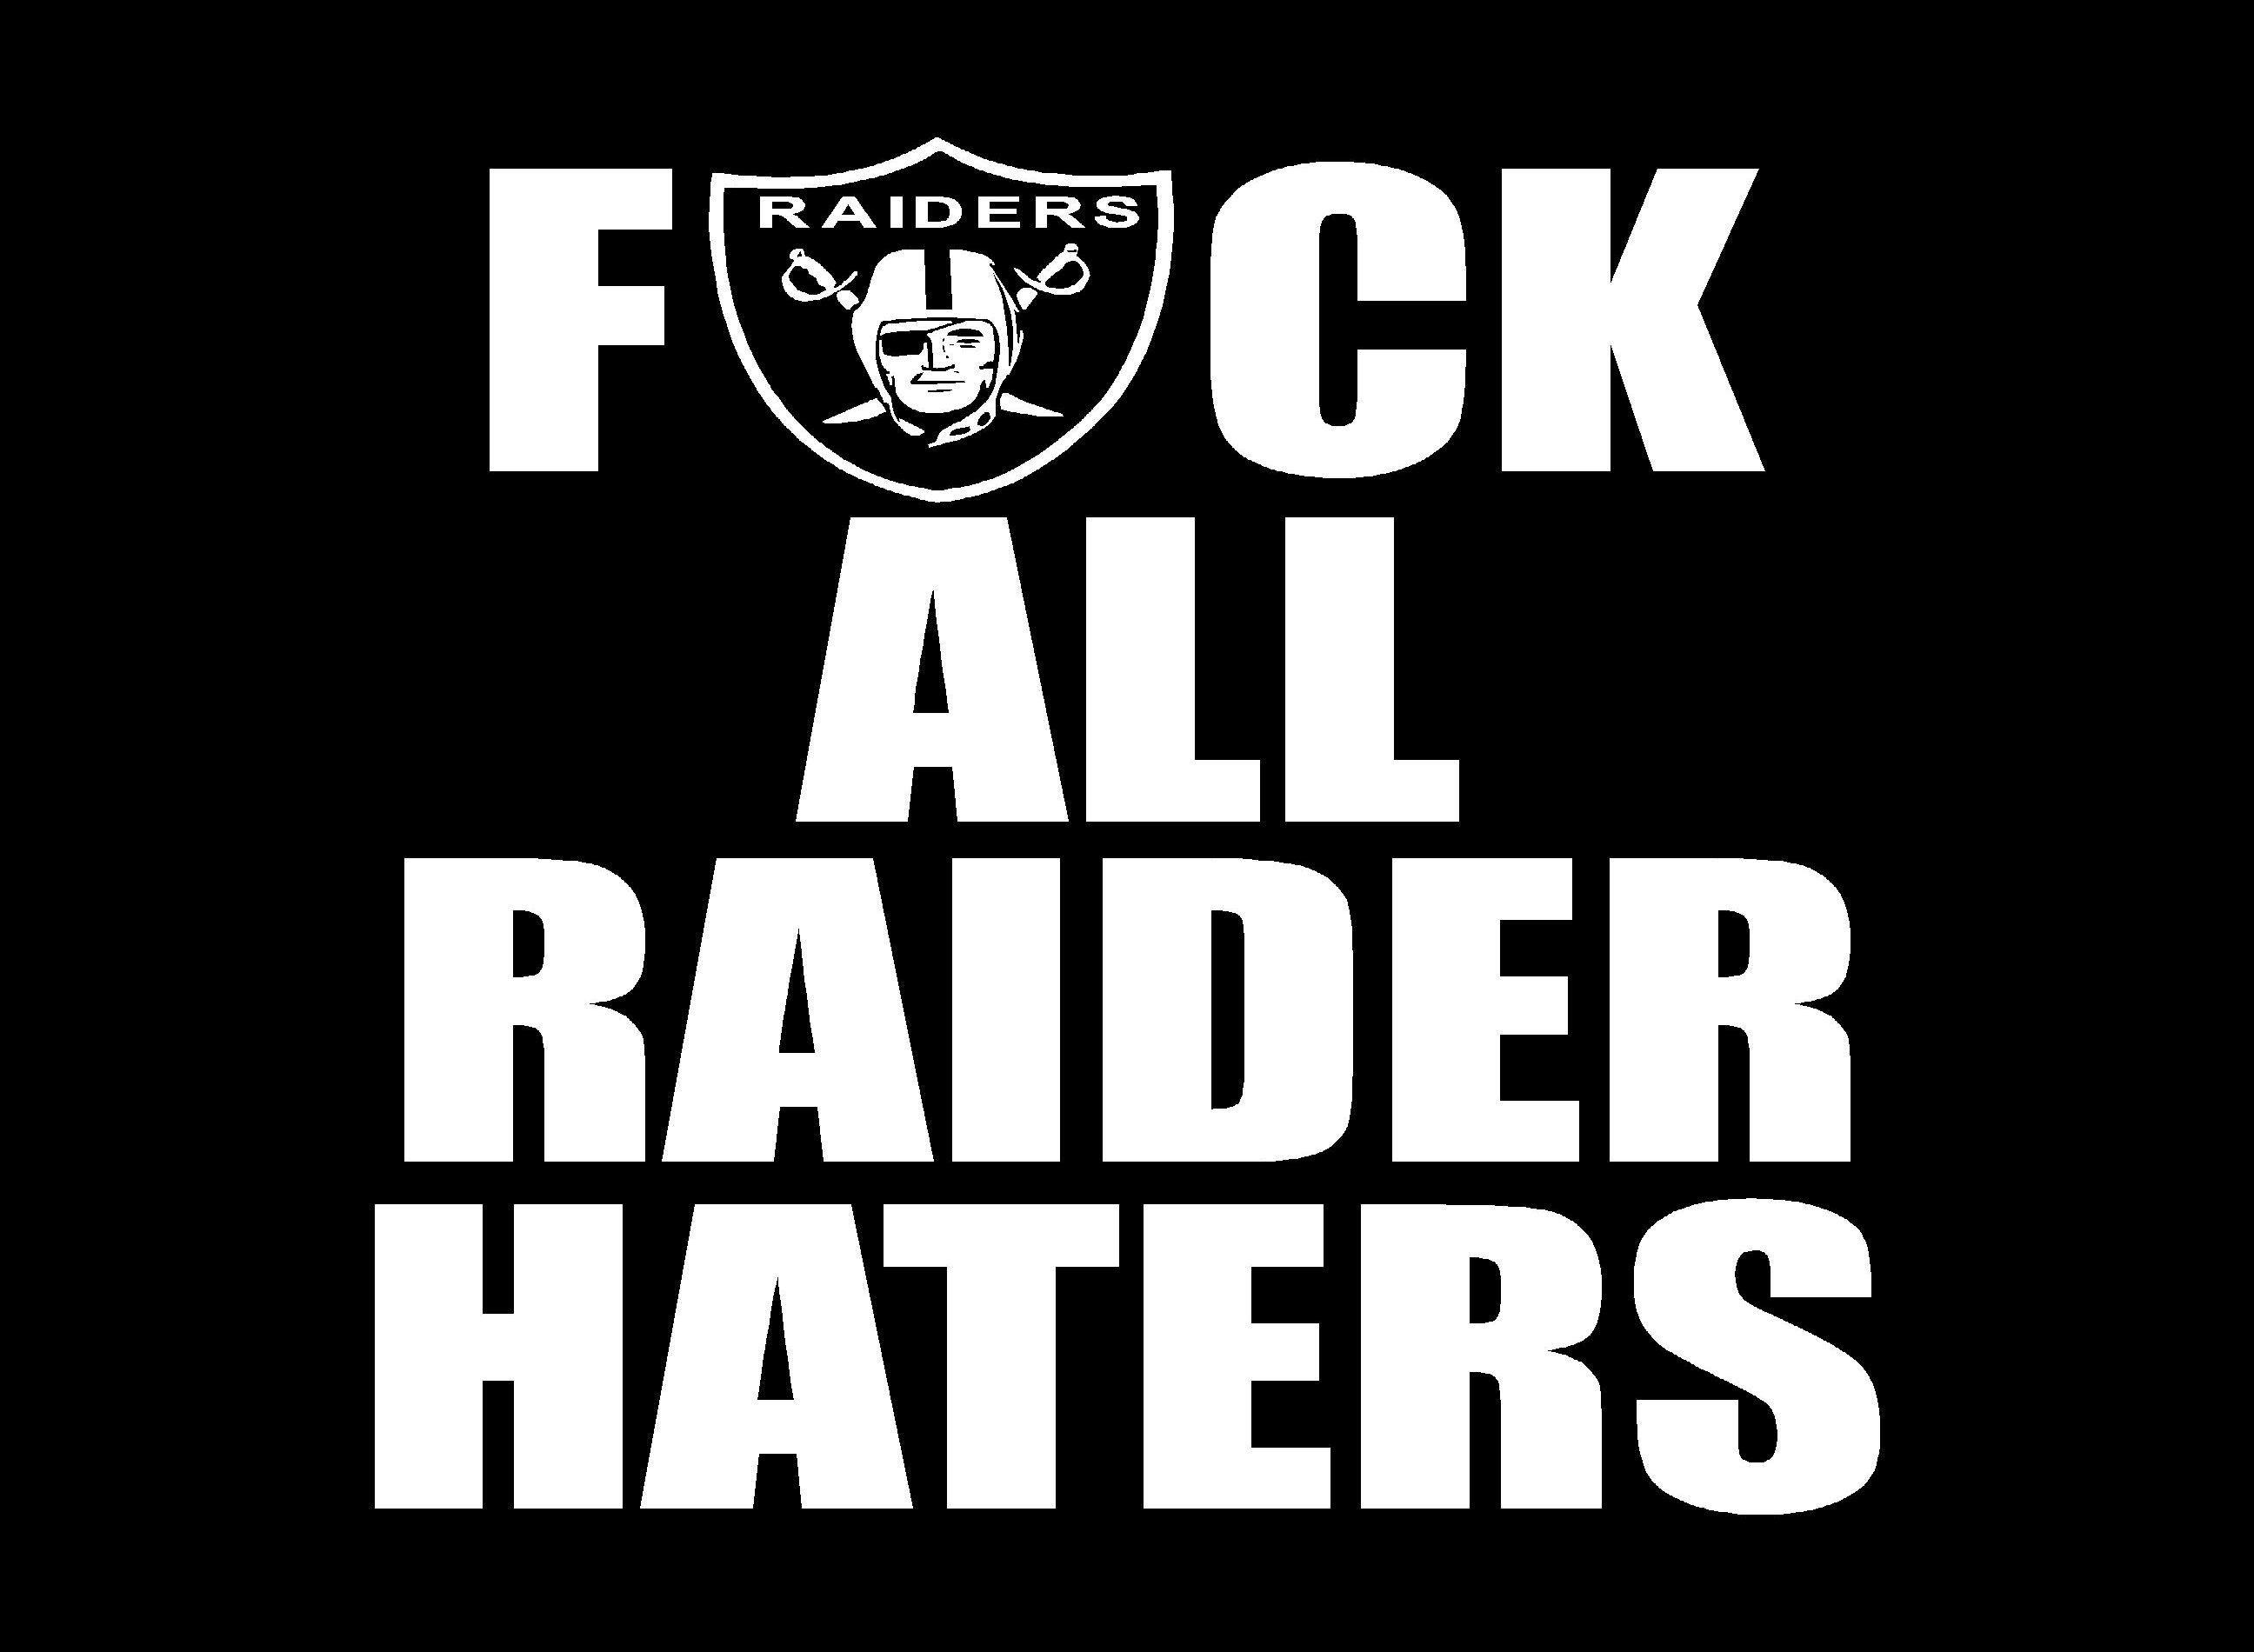 I Love Haters Wallpaper